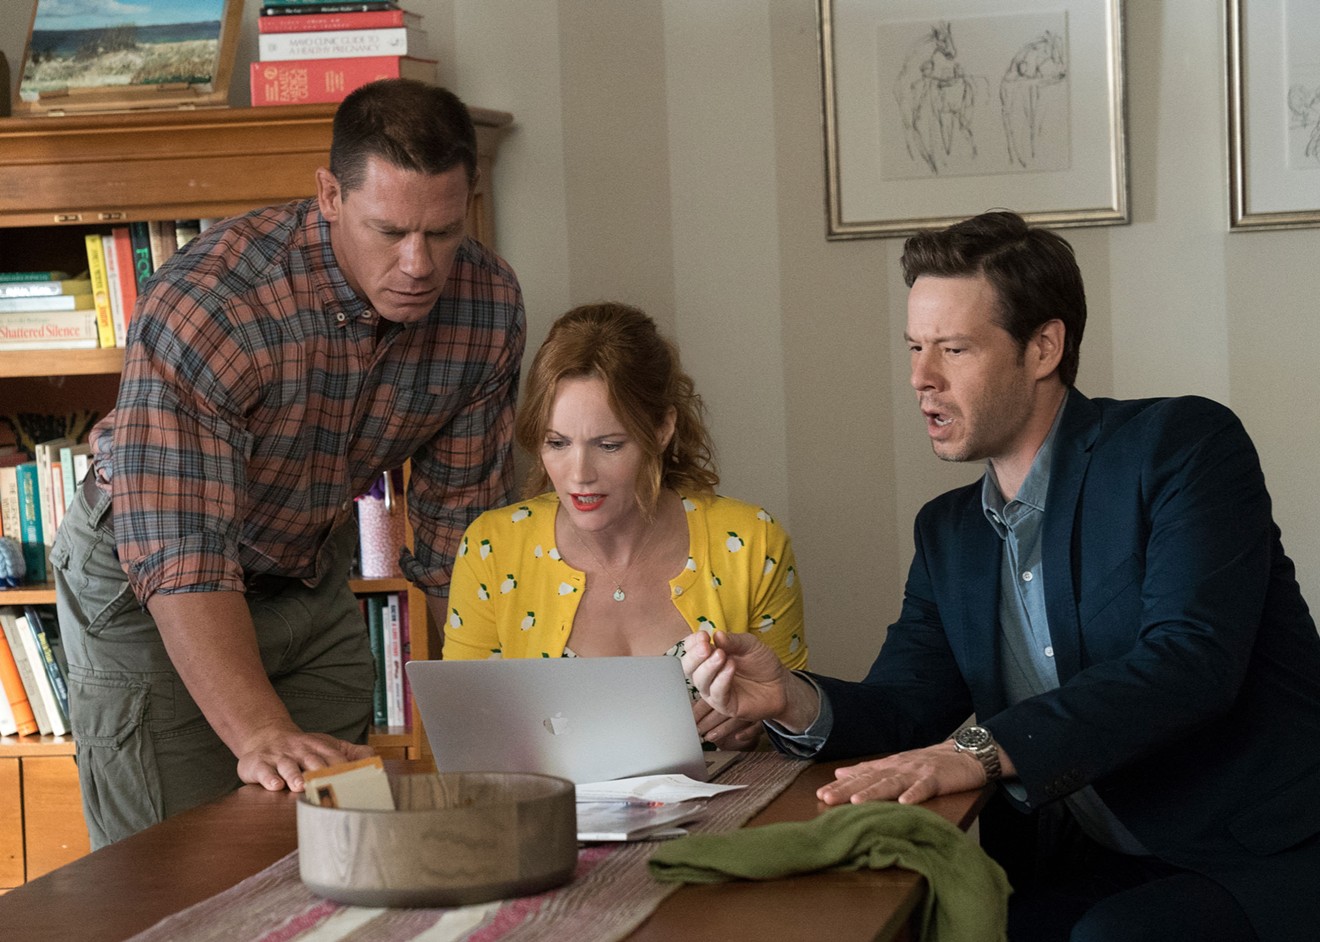 The cock-blockers of Blockers include (from left): John Cena as Mitchell, a butt-chugging father trying to stop his daughter from losing her virginity; Leslie Mann as single mom Lisa; and Ike Barinholtz as absentee father Hunter.